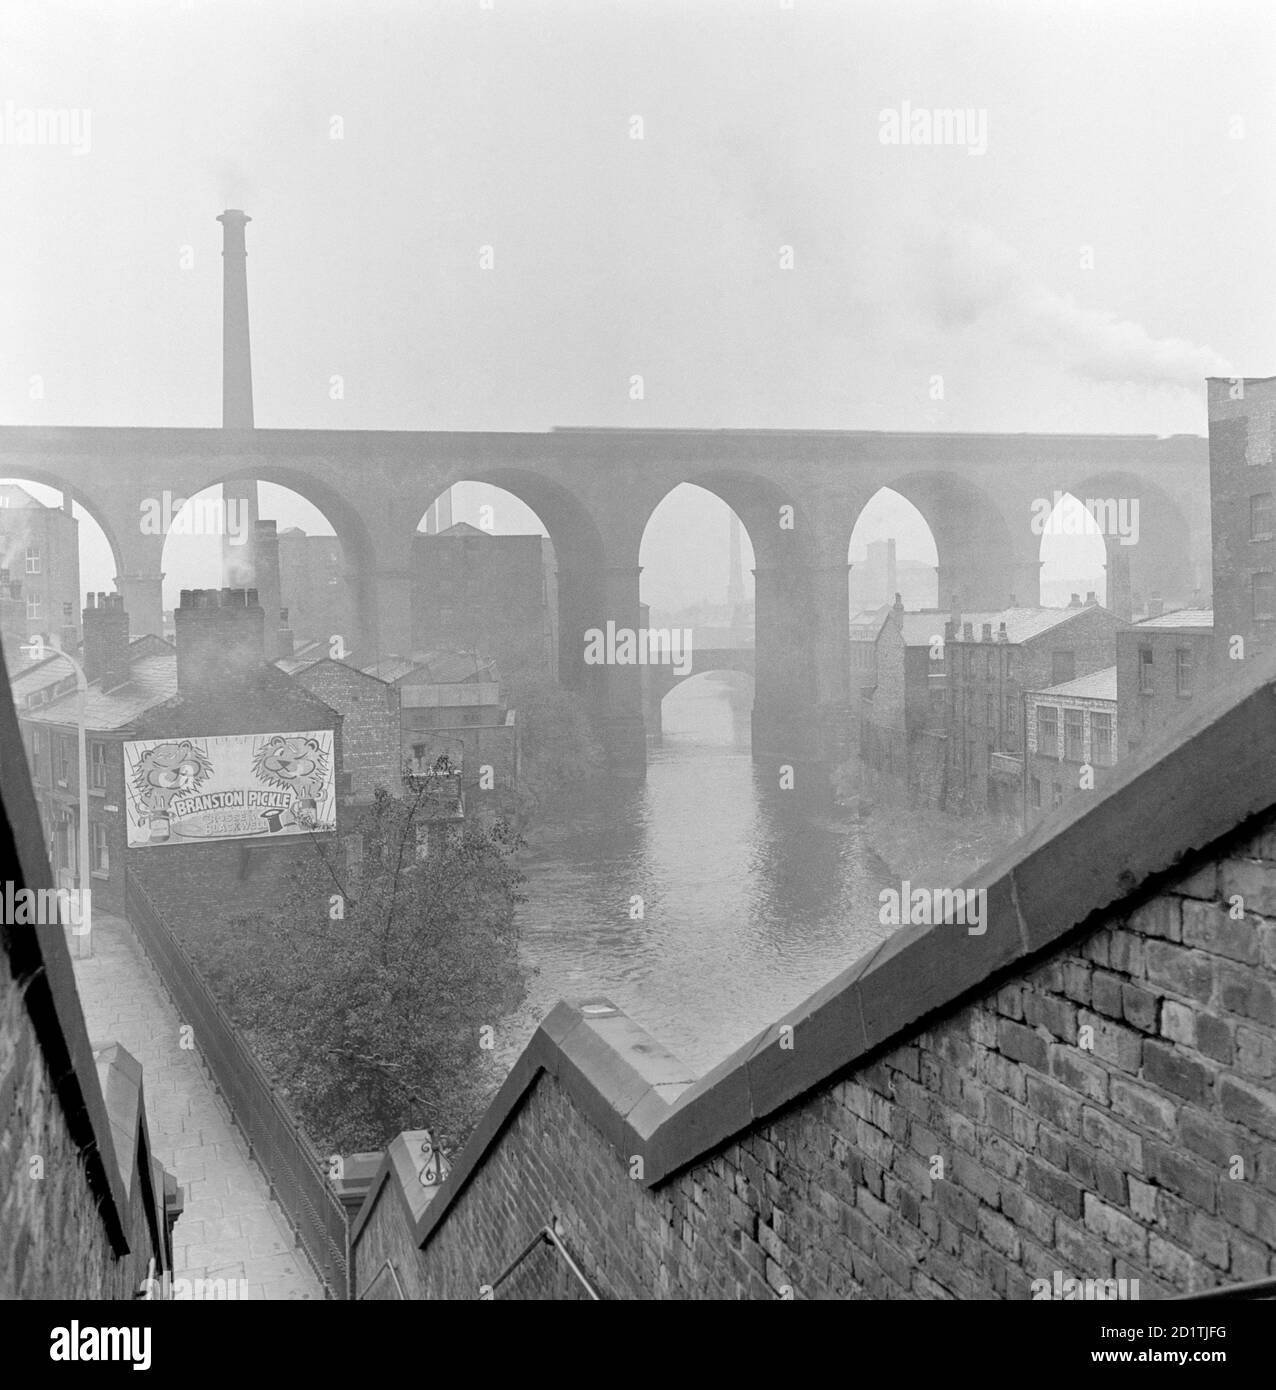 RAILWAY VIADUCT, Stockport, Greater Manchester. This evocative urban landscape shows the railway viaduct in Stockport, looking along the river. Photographed by Eric de Mare in 1954. Stock Photo